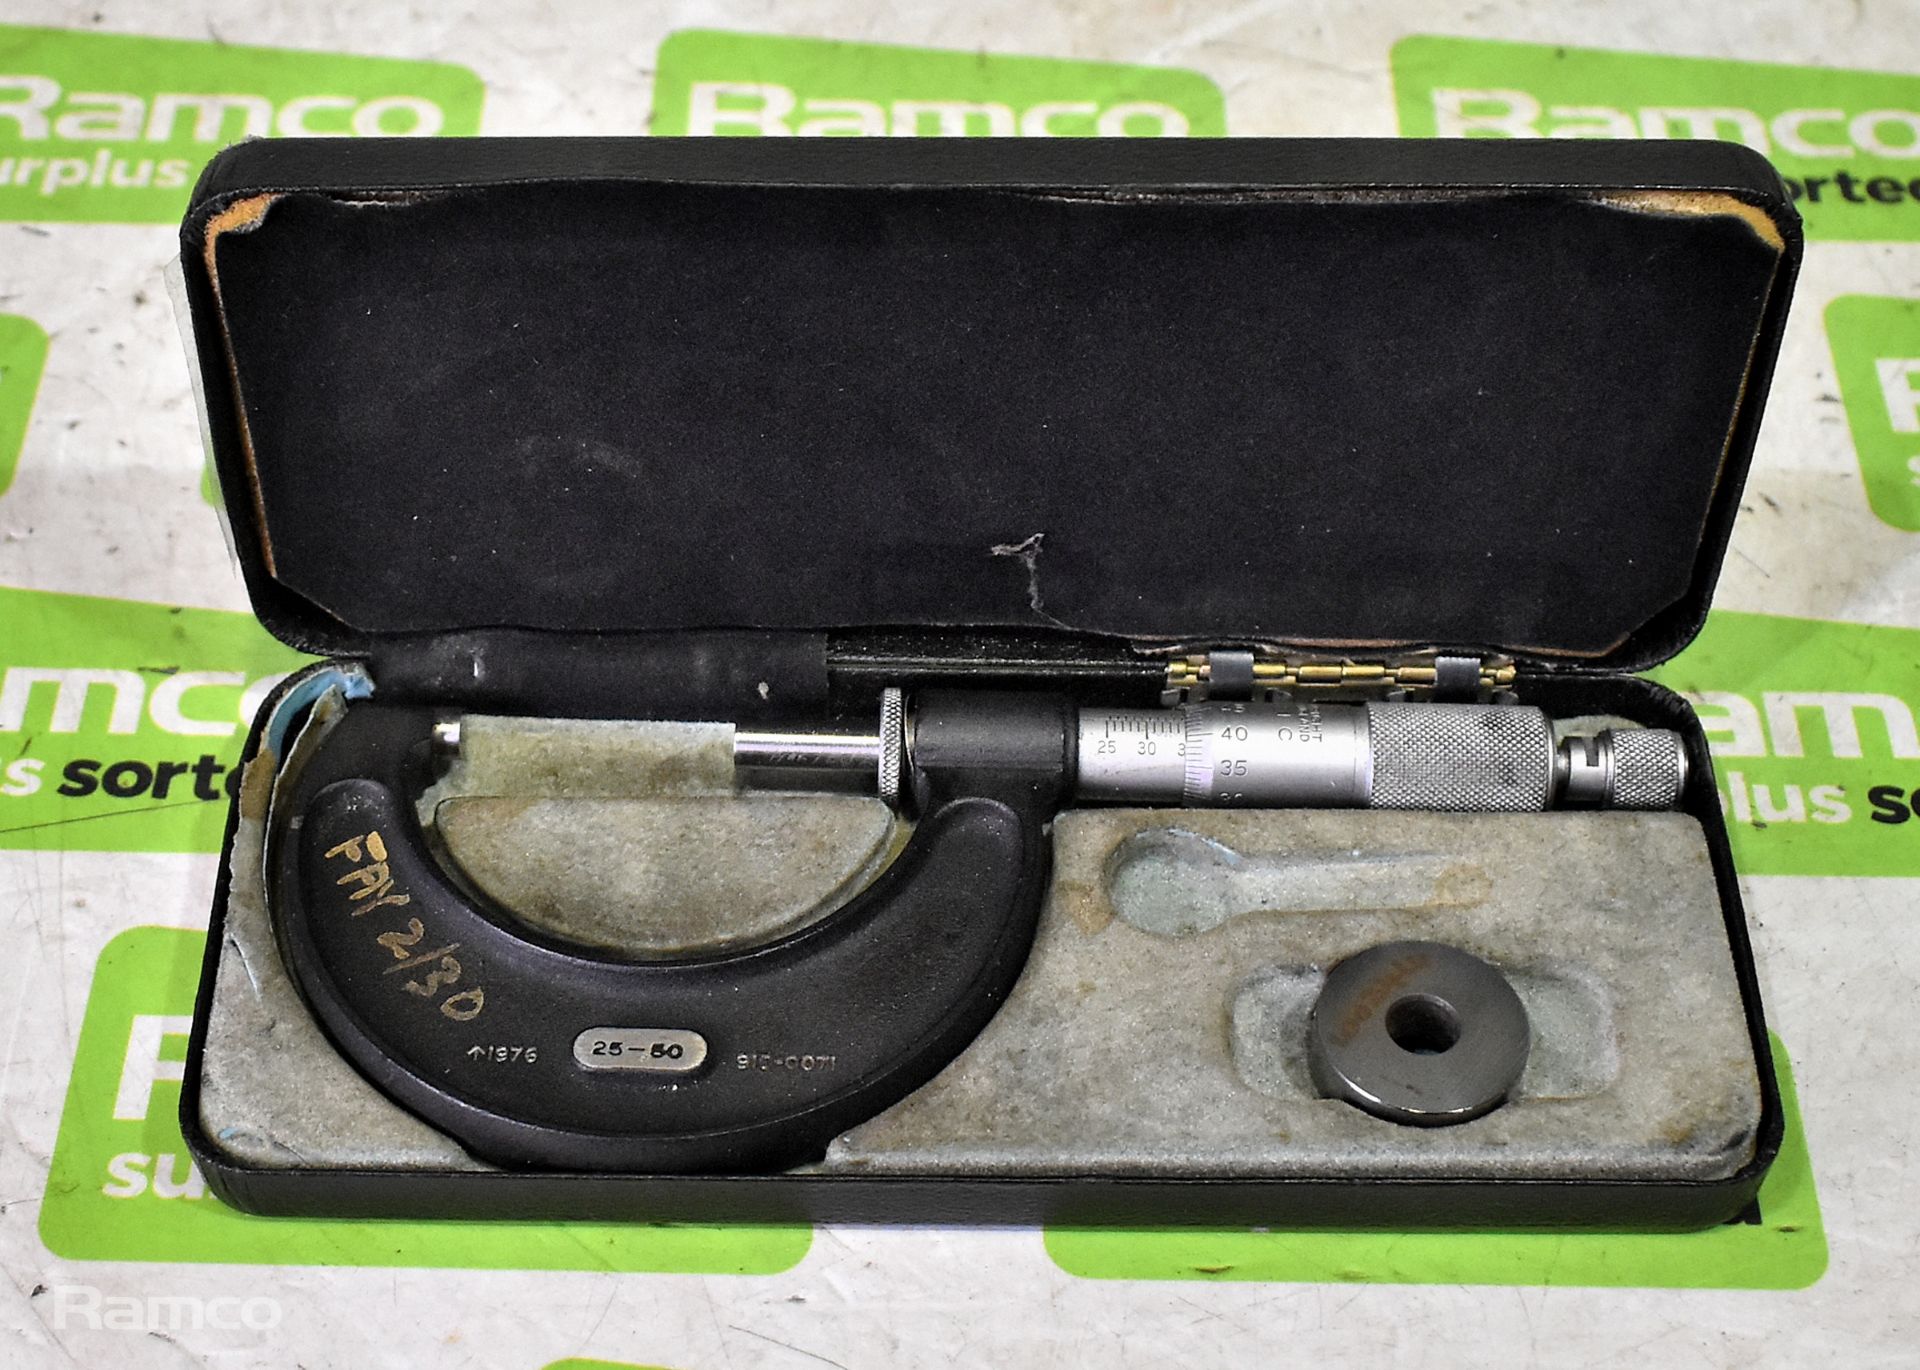 Moore and Wright No 966m 25-50mm micrometer caliper with case